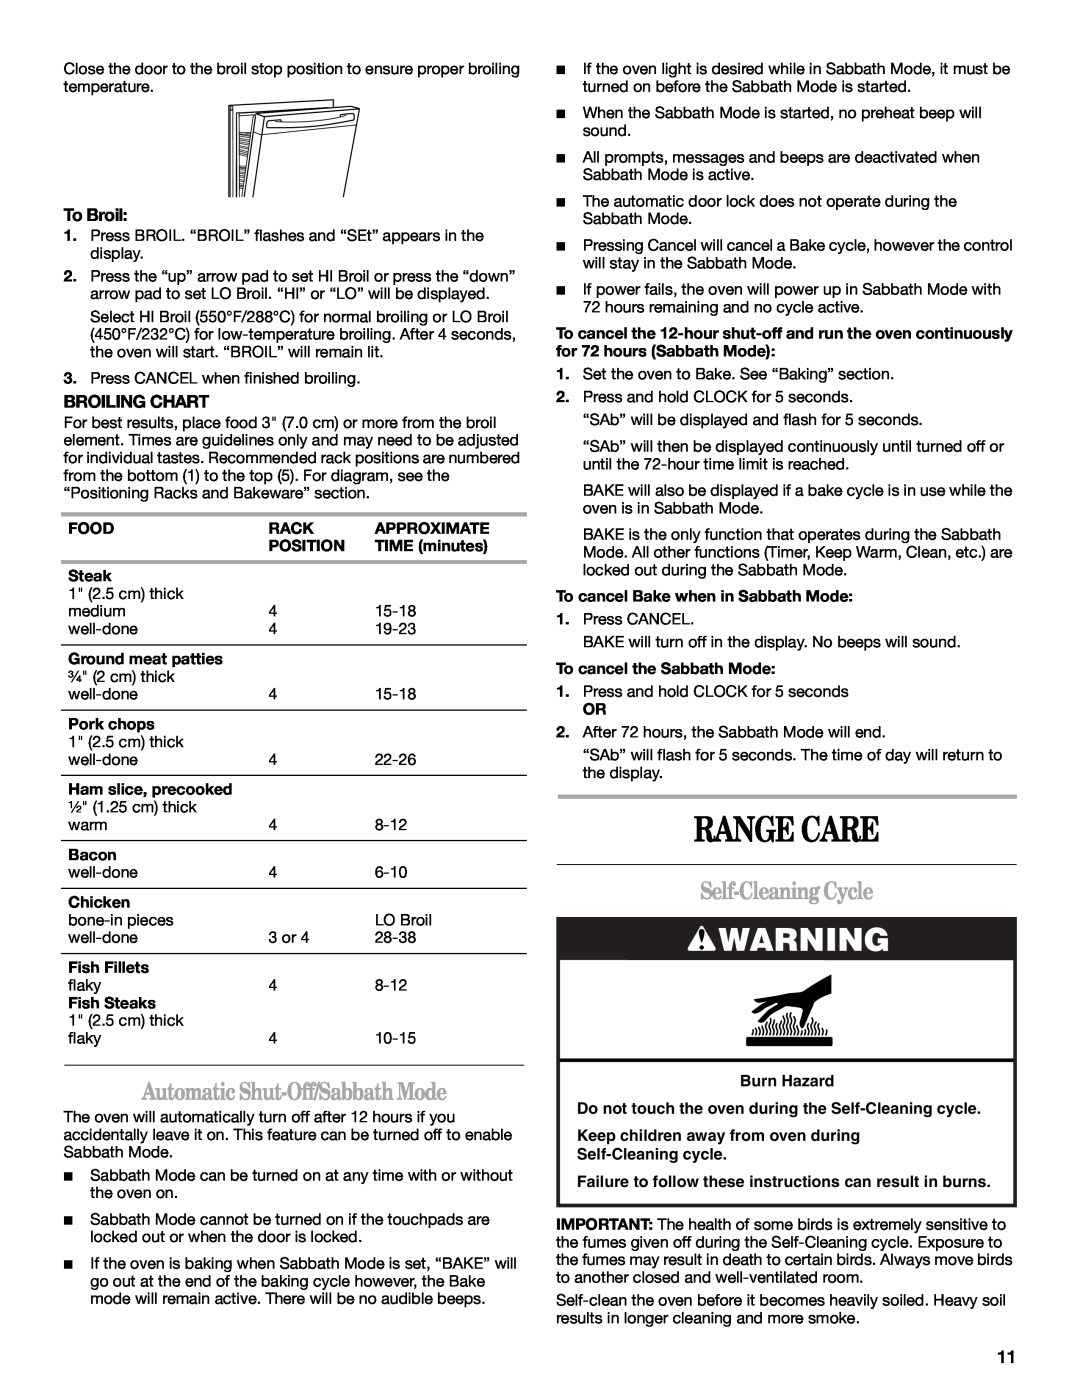 Whirlpool 8113P749-60 manual Range Care, Automatic Shut-Off/SabbathMode, Self-CleaningCycle, To Broil, Broiling Chart 